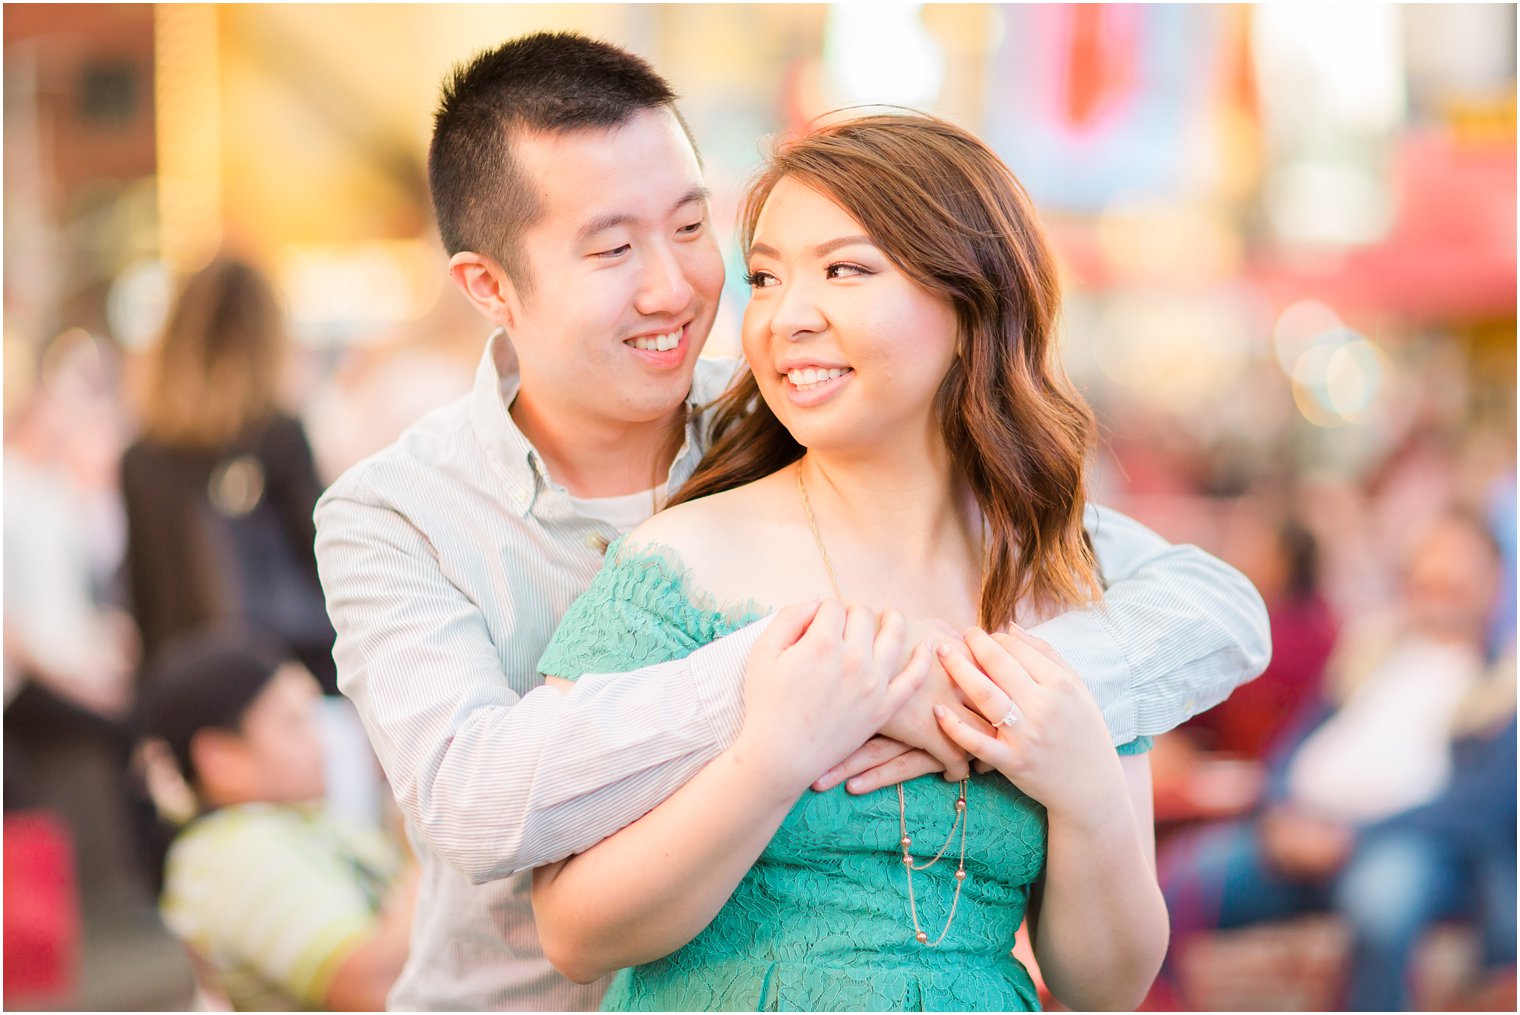 Engagement photo in Times Square by Idalia Photography